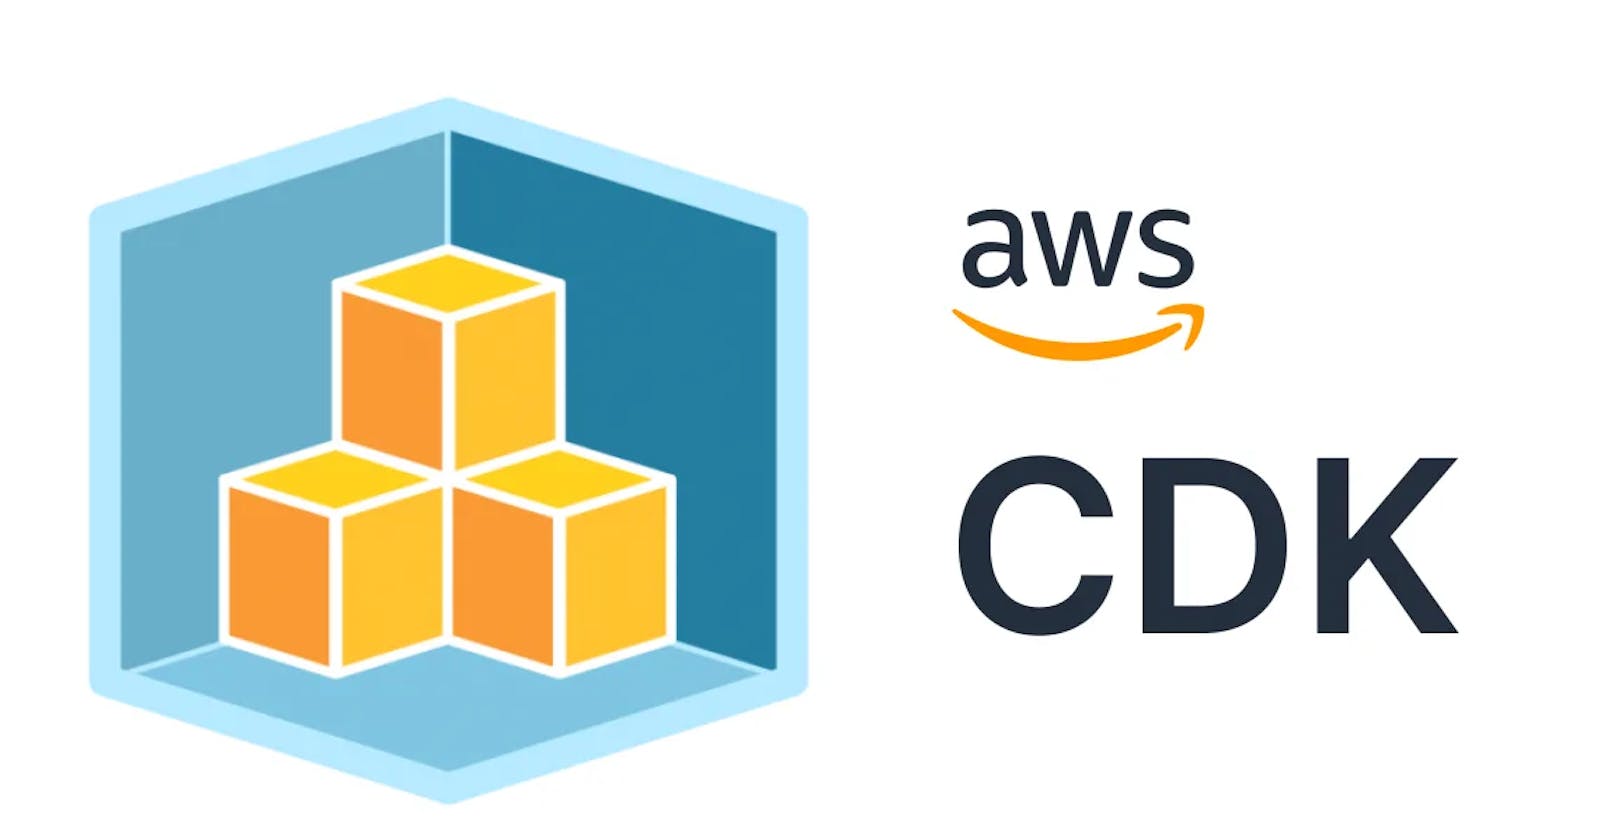 What does CDK Synth do in AWS CDK